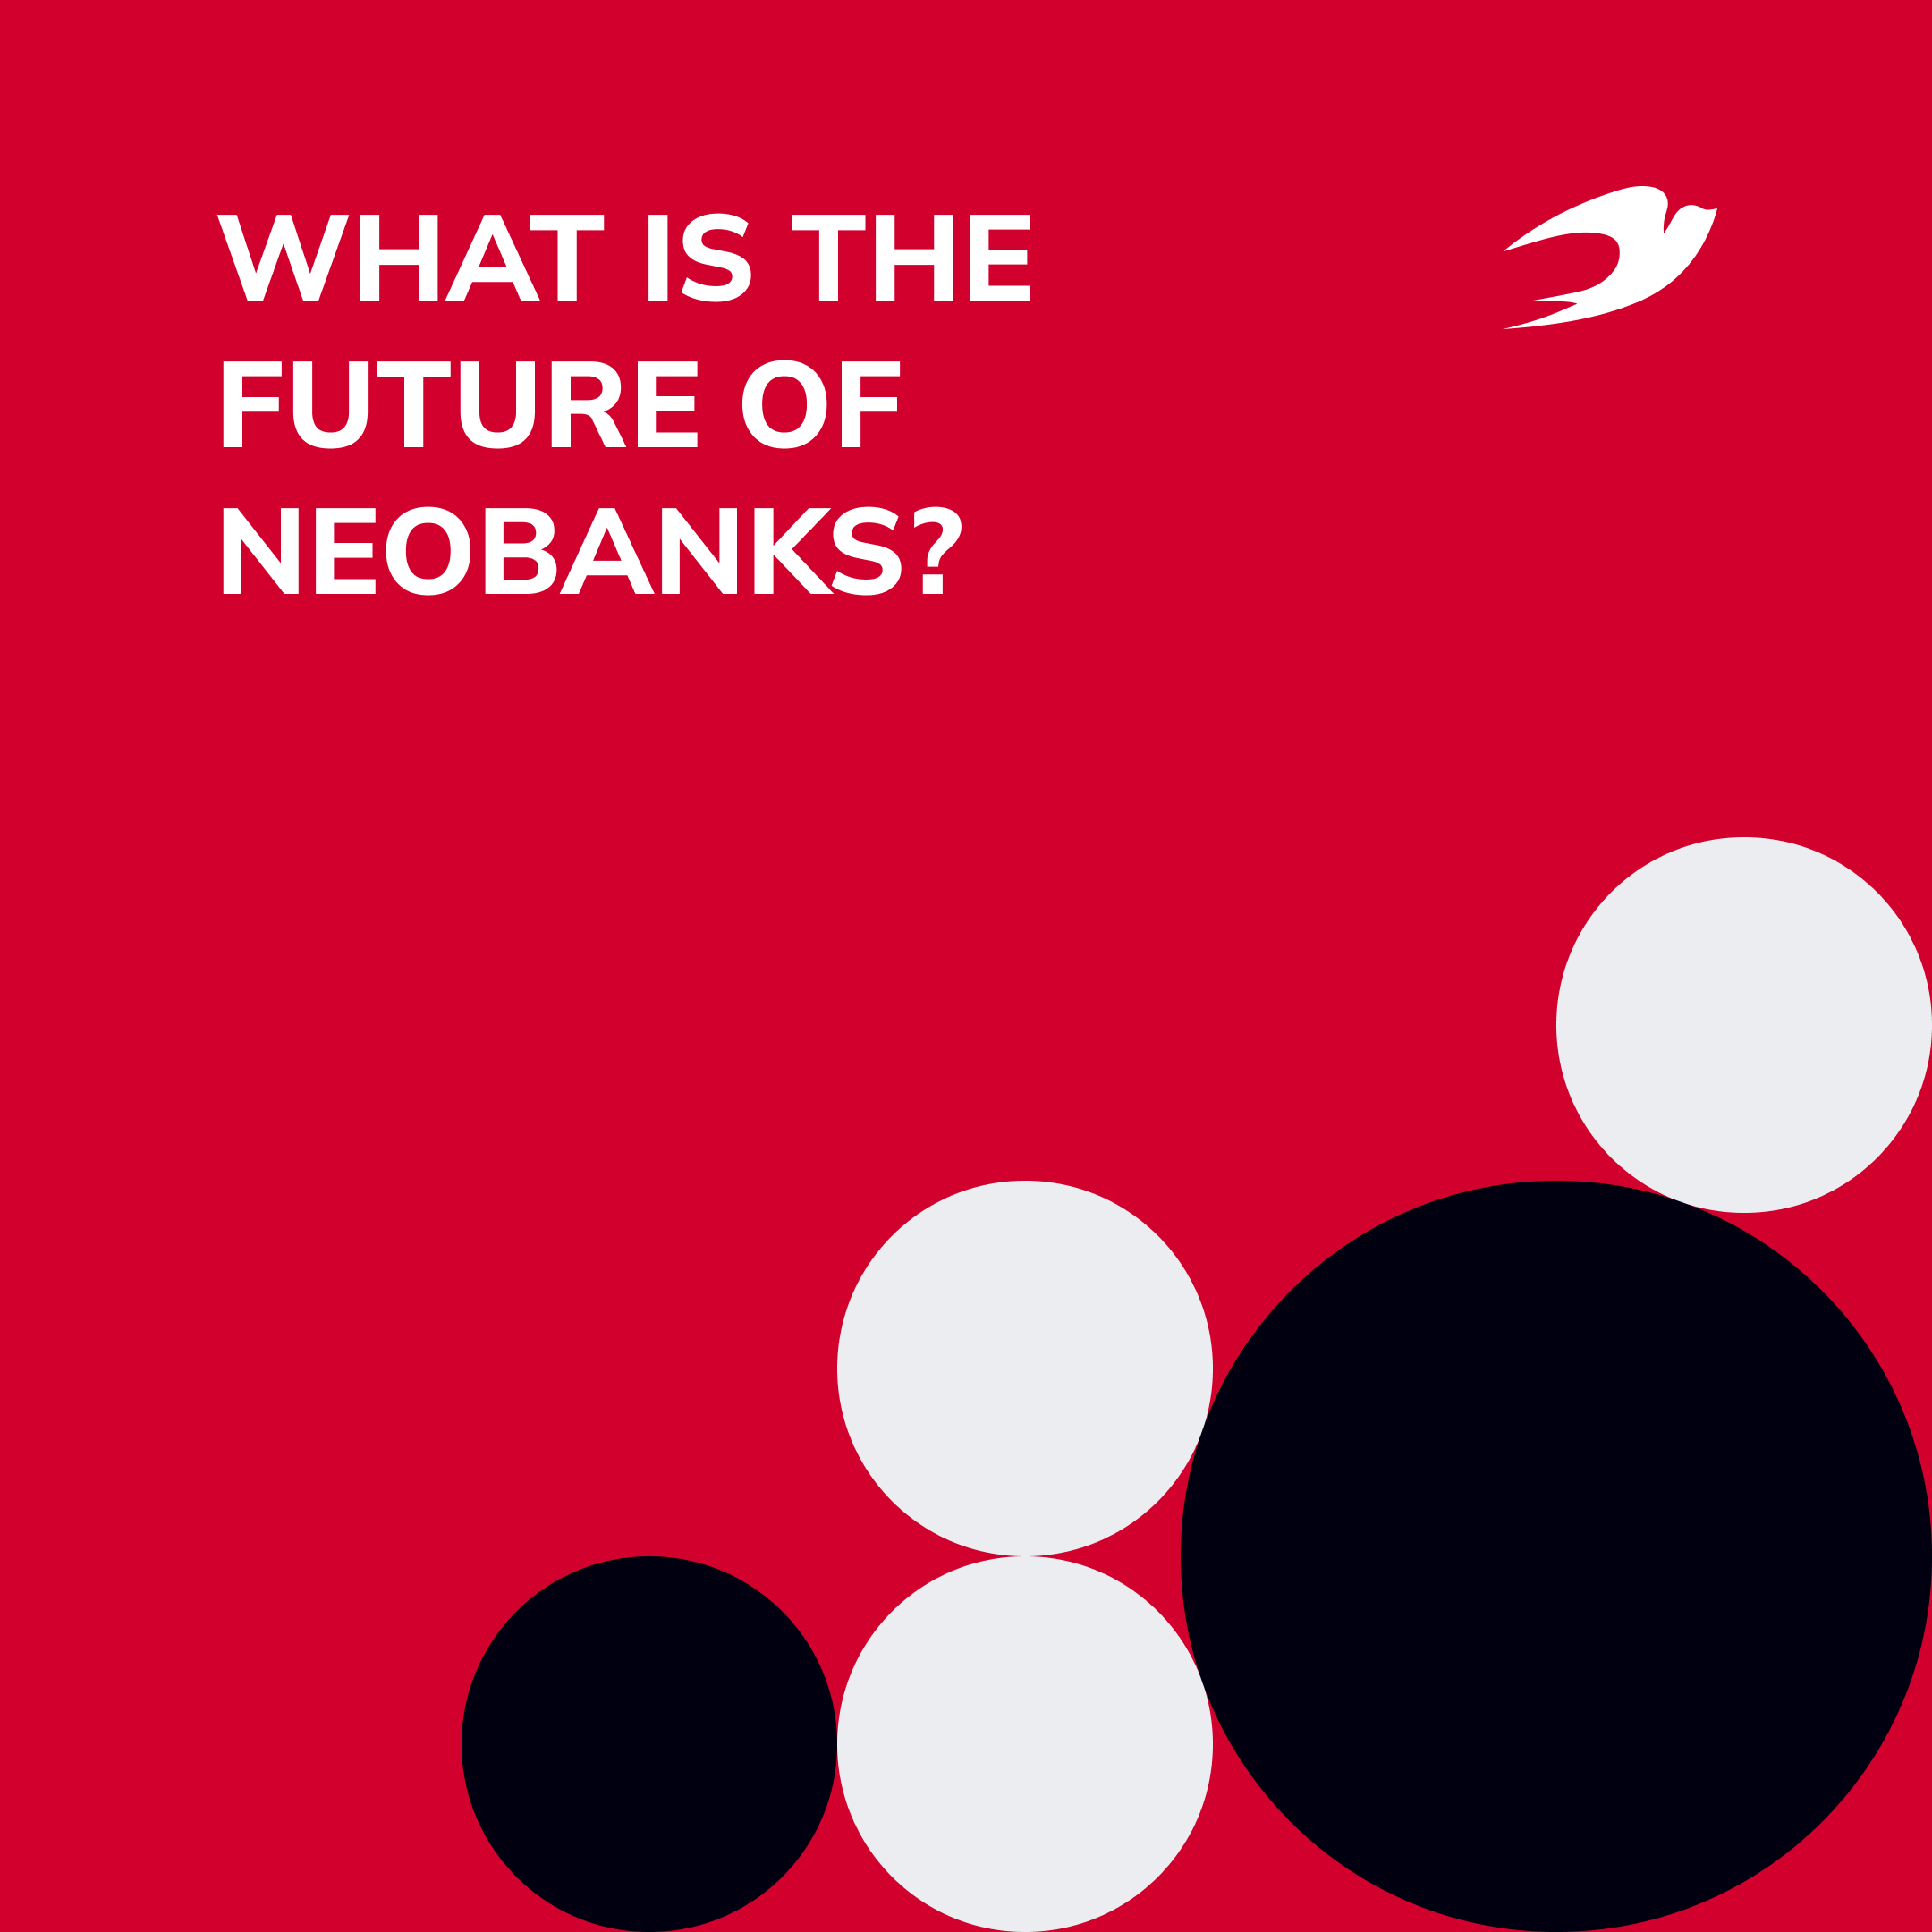 What is the Future of Neobanks?